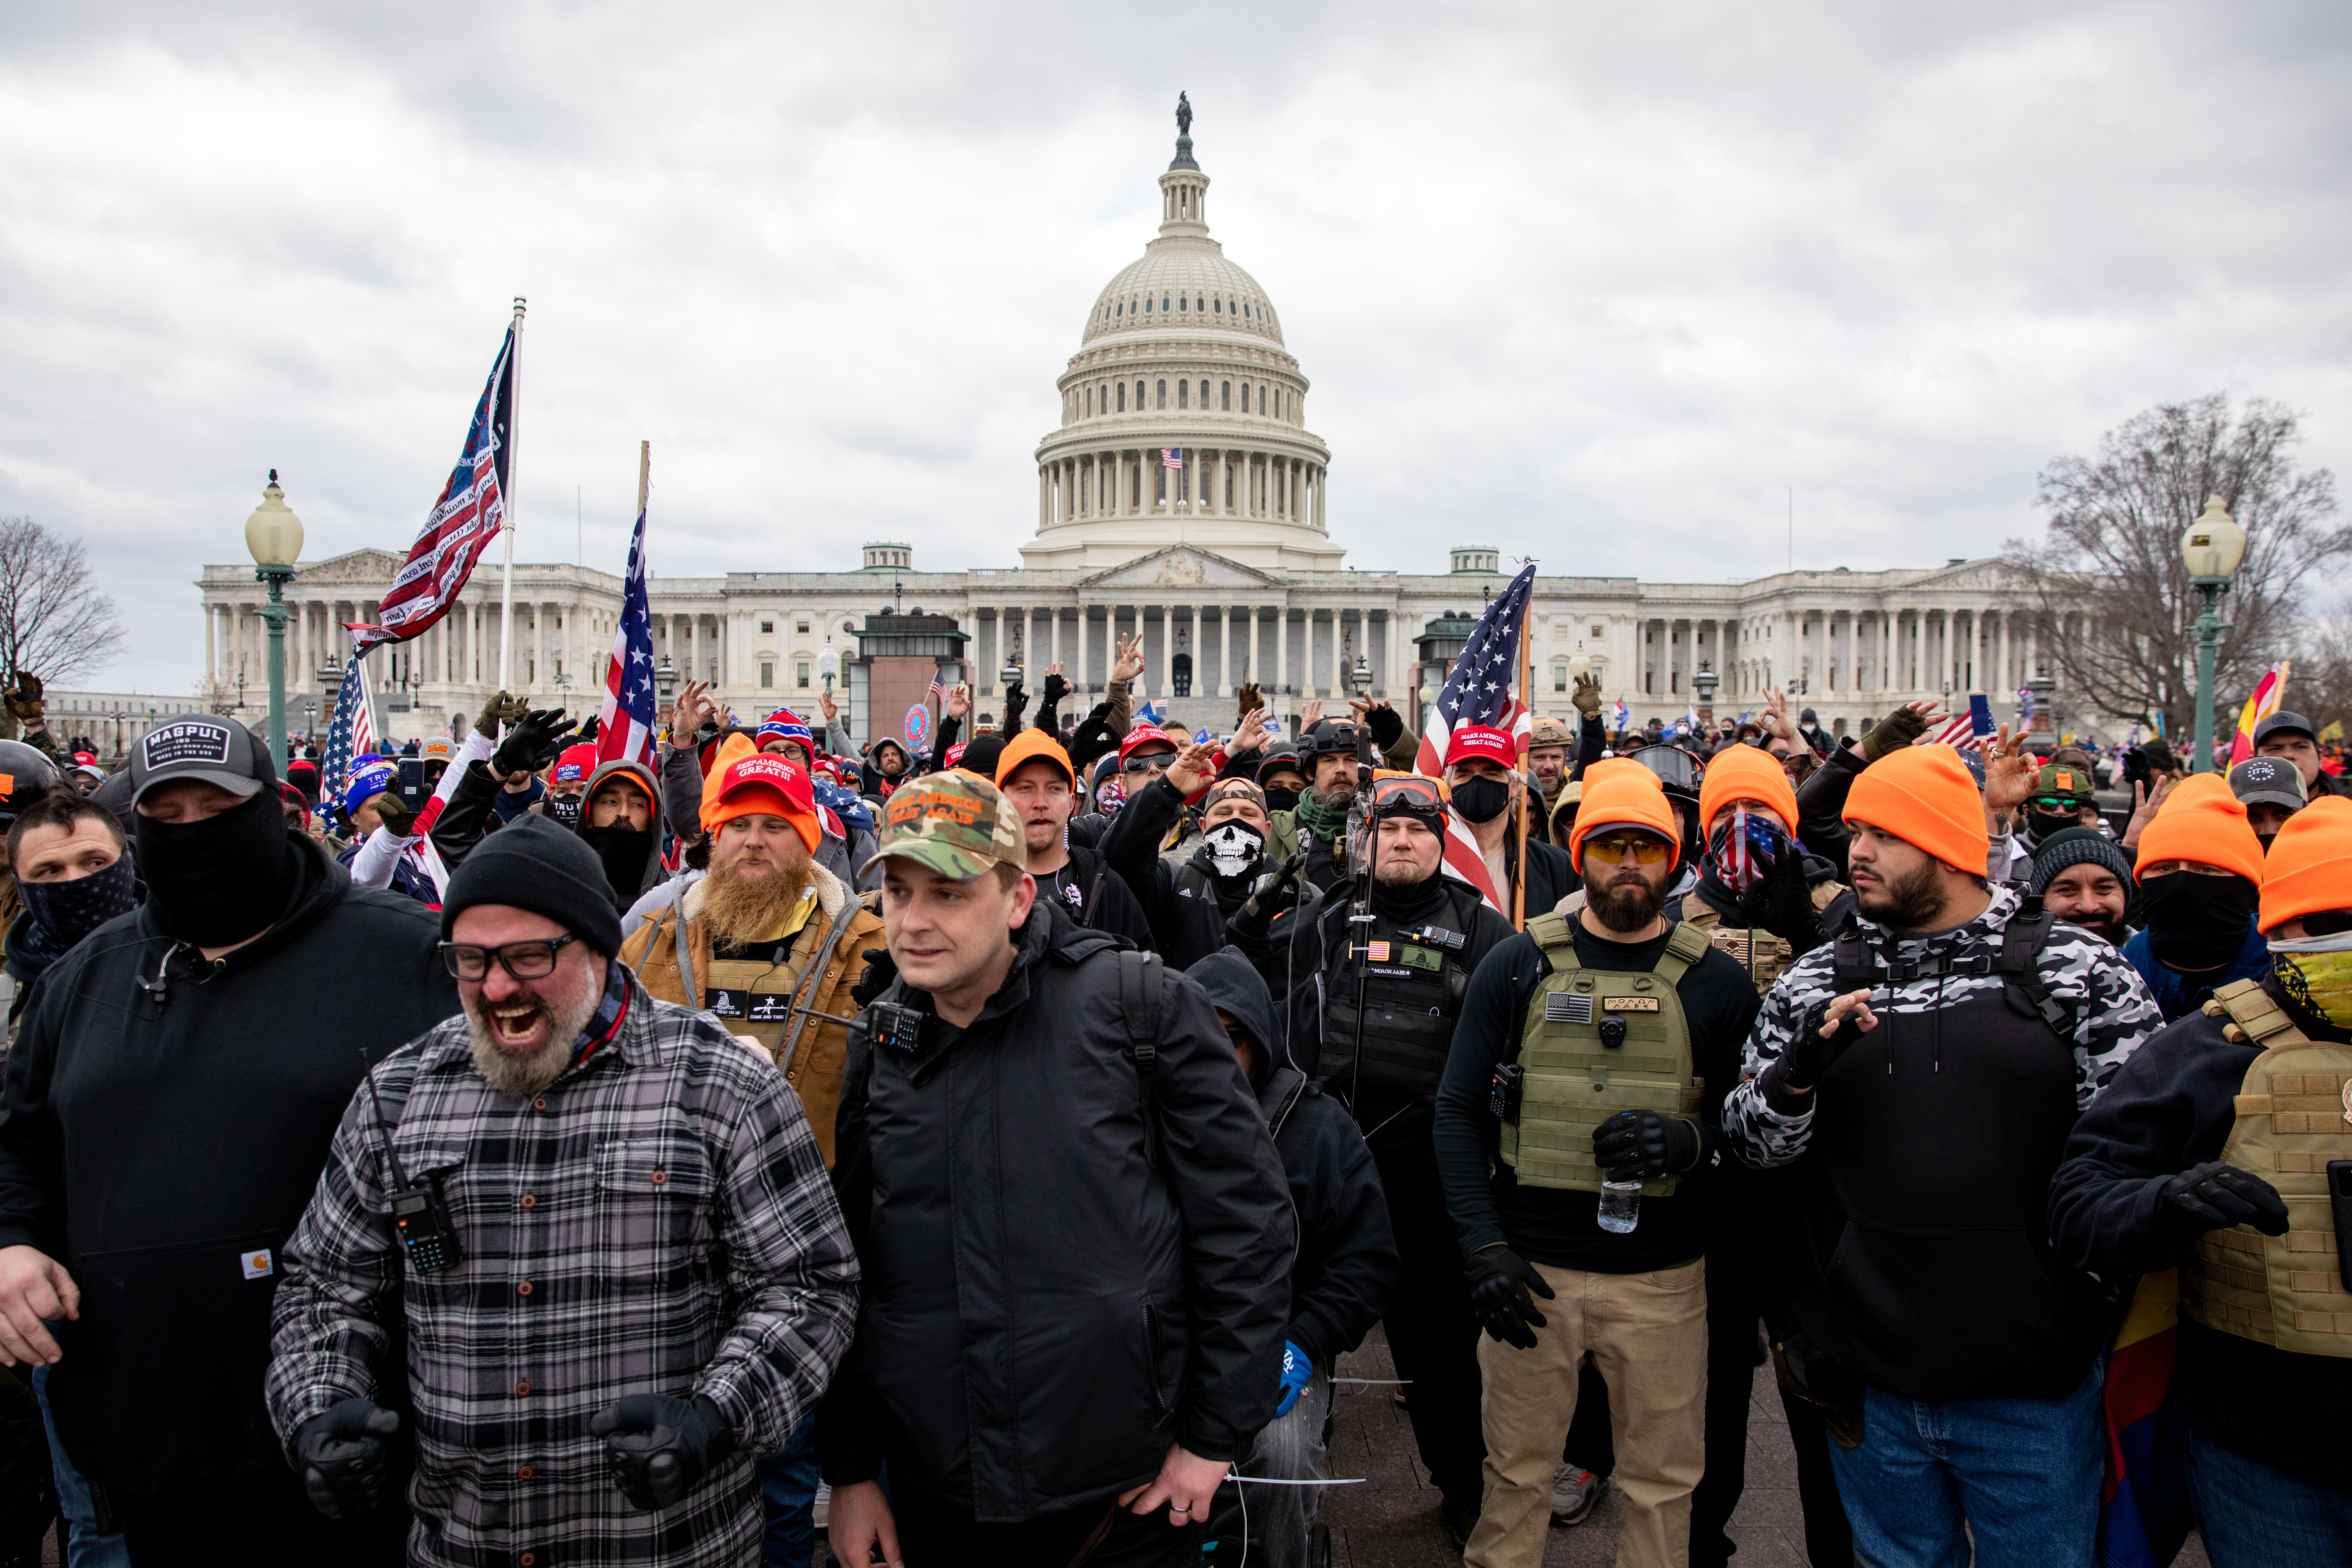 Members of the Proud Boys including Joseph Biggs (grey plaid flannel shirt) and Zach Rehl (camouflage cap) march near the U.S. Capitol on Jan. 6. 